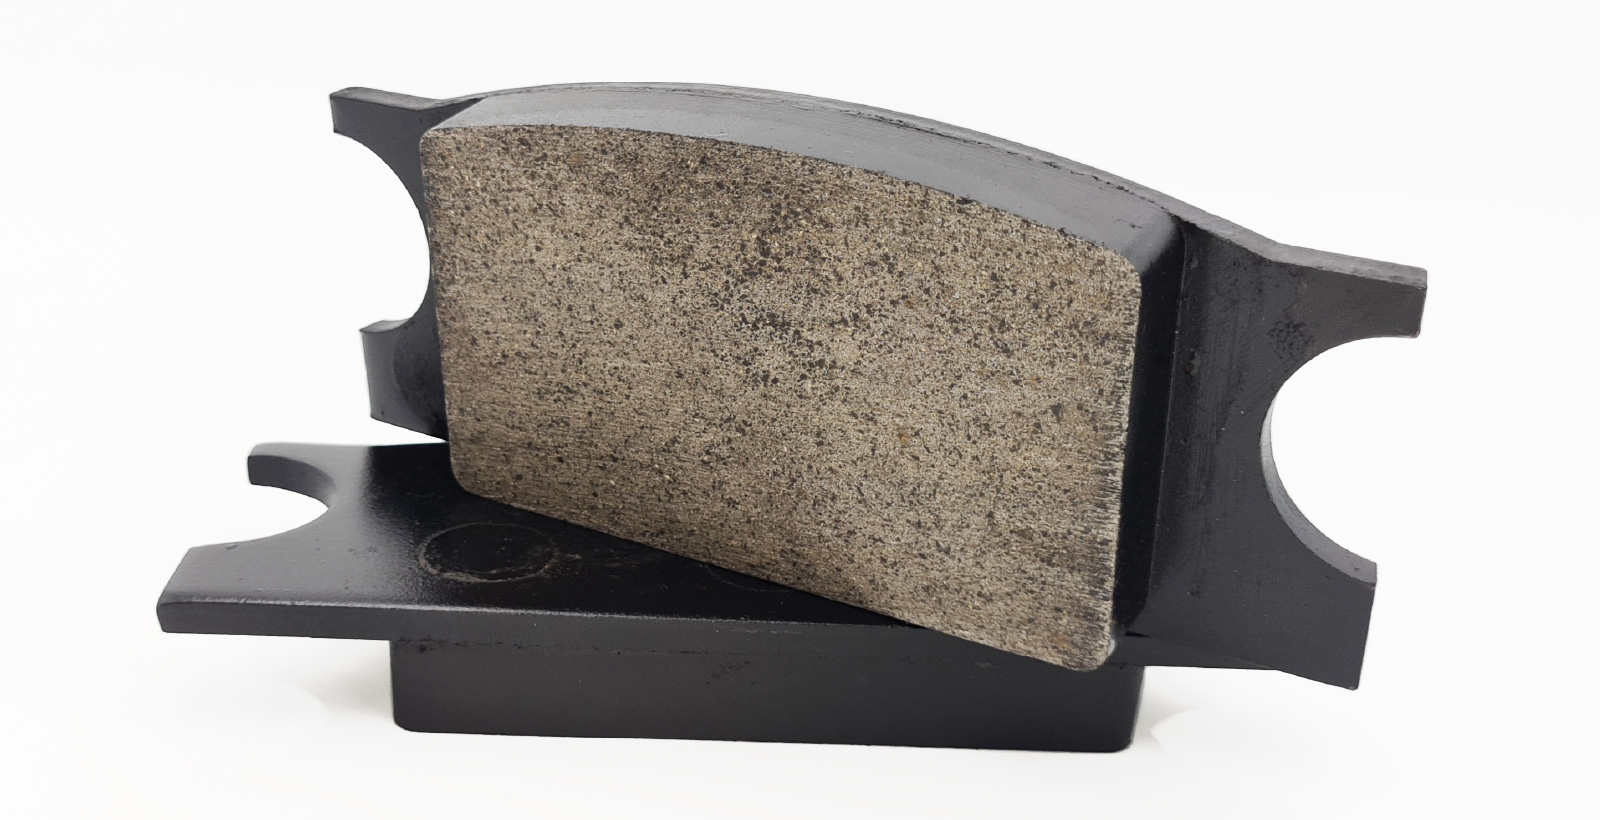 Commercial Brake Pads for Paper and Pulp Industry